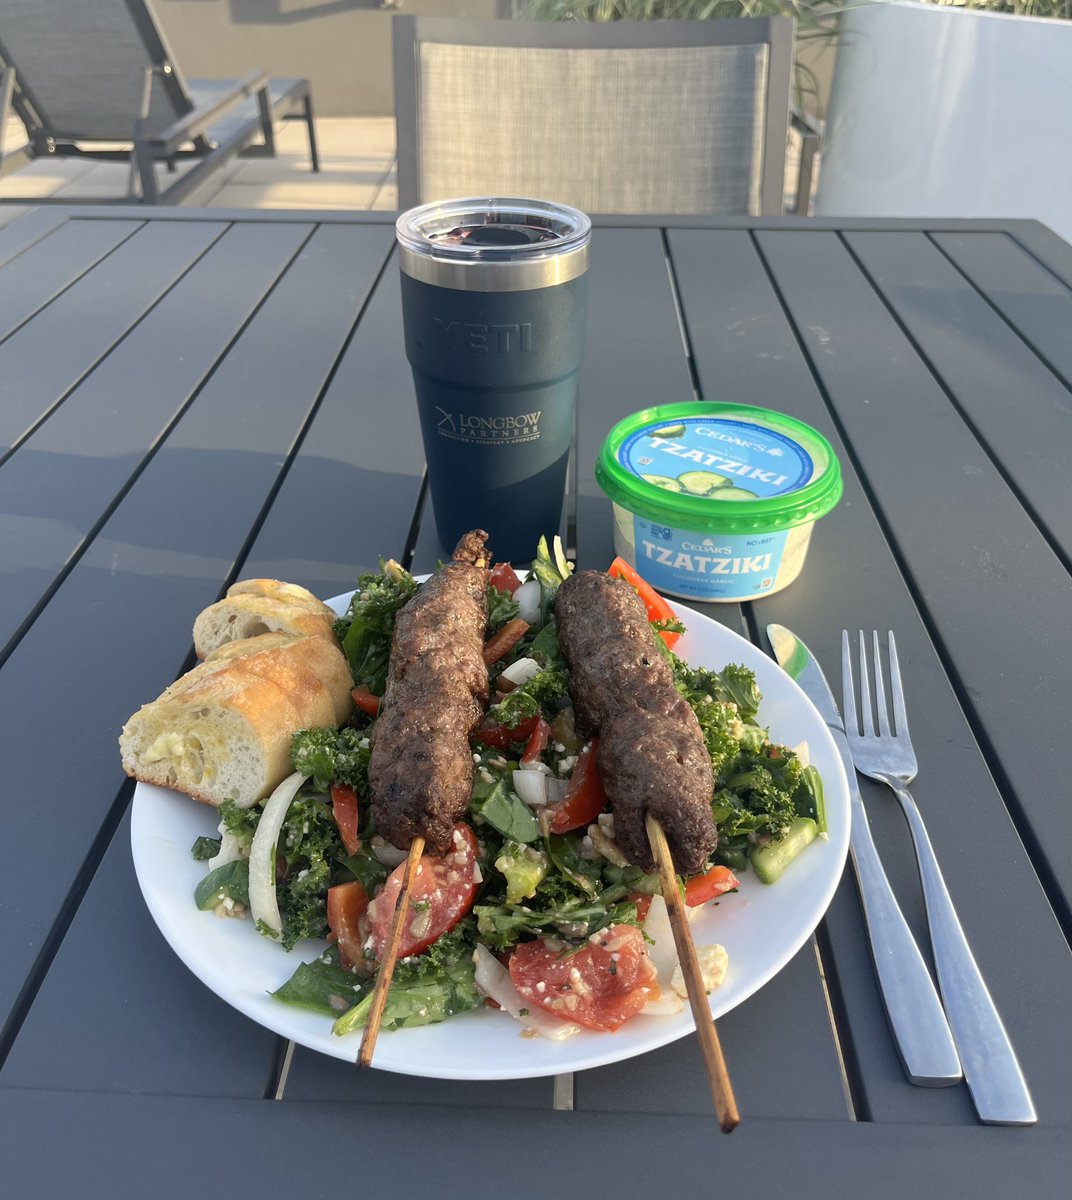 Decided to supp on the roof before the rains come tomorrow. Moroccan lamb kabobs w Tzatziki and a two glasses of Sonoma County Cab in the Yeti #twittersupperclub